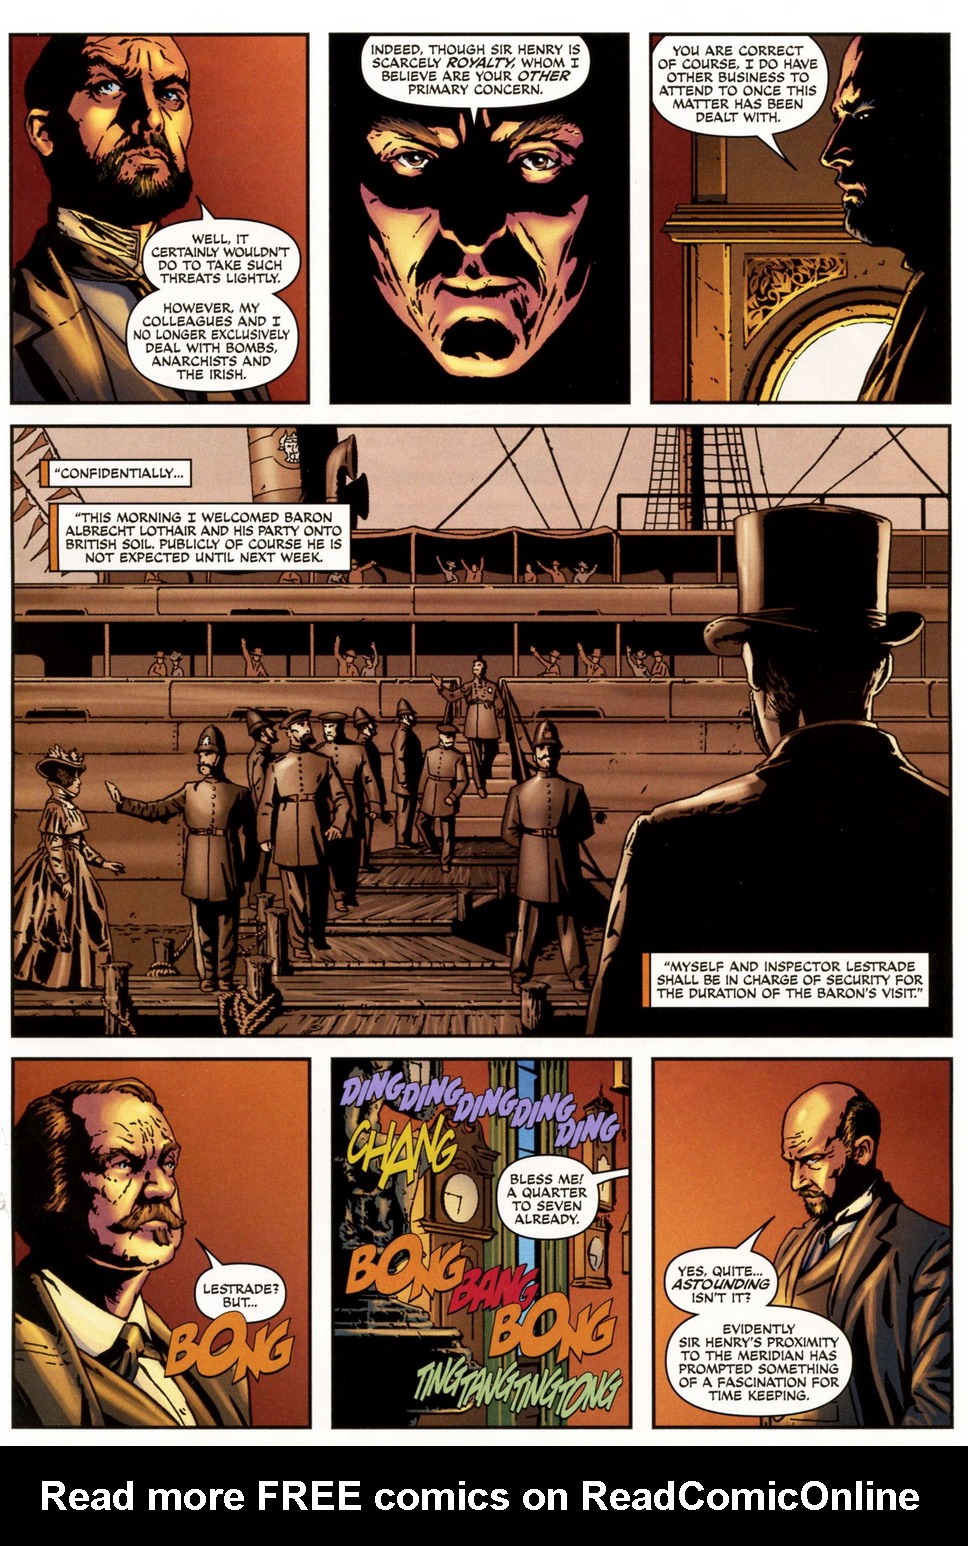 Sherlock Holmes (2009) issue 1 - Page 16